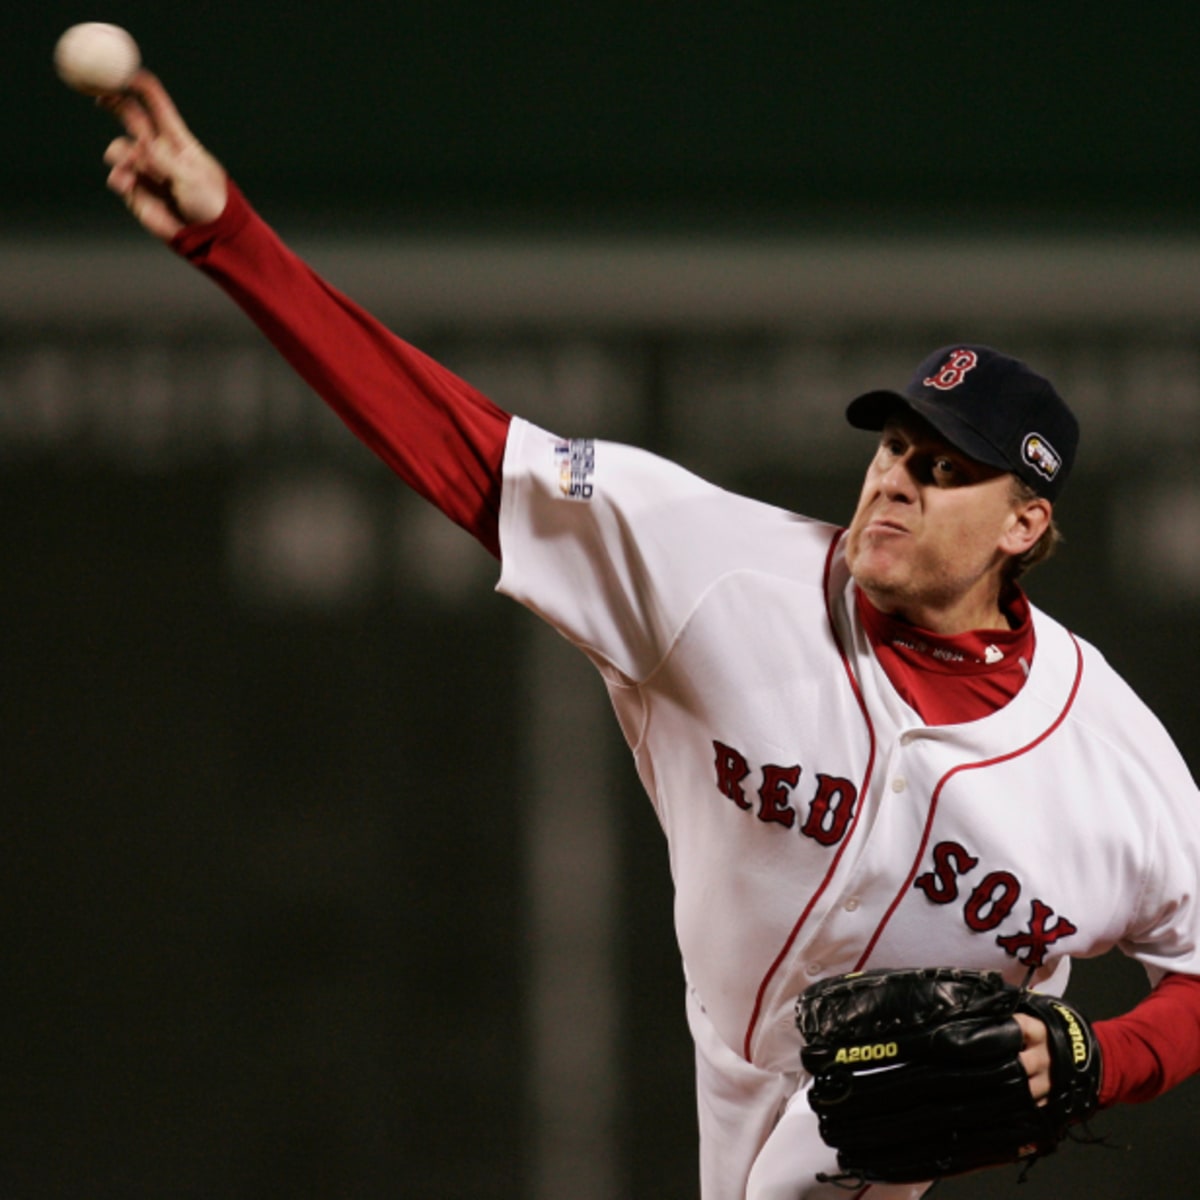 Curt Schilling reveals without permission that former Red Sox